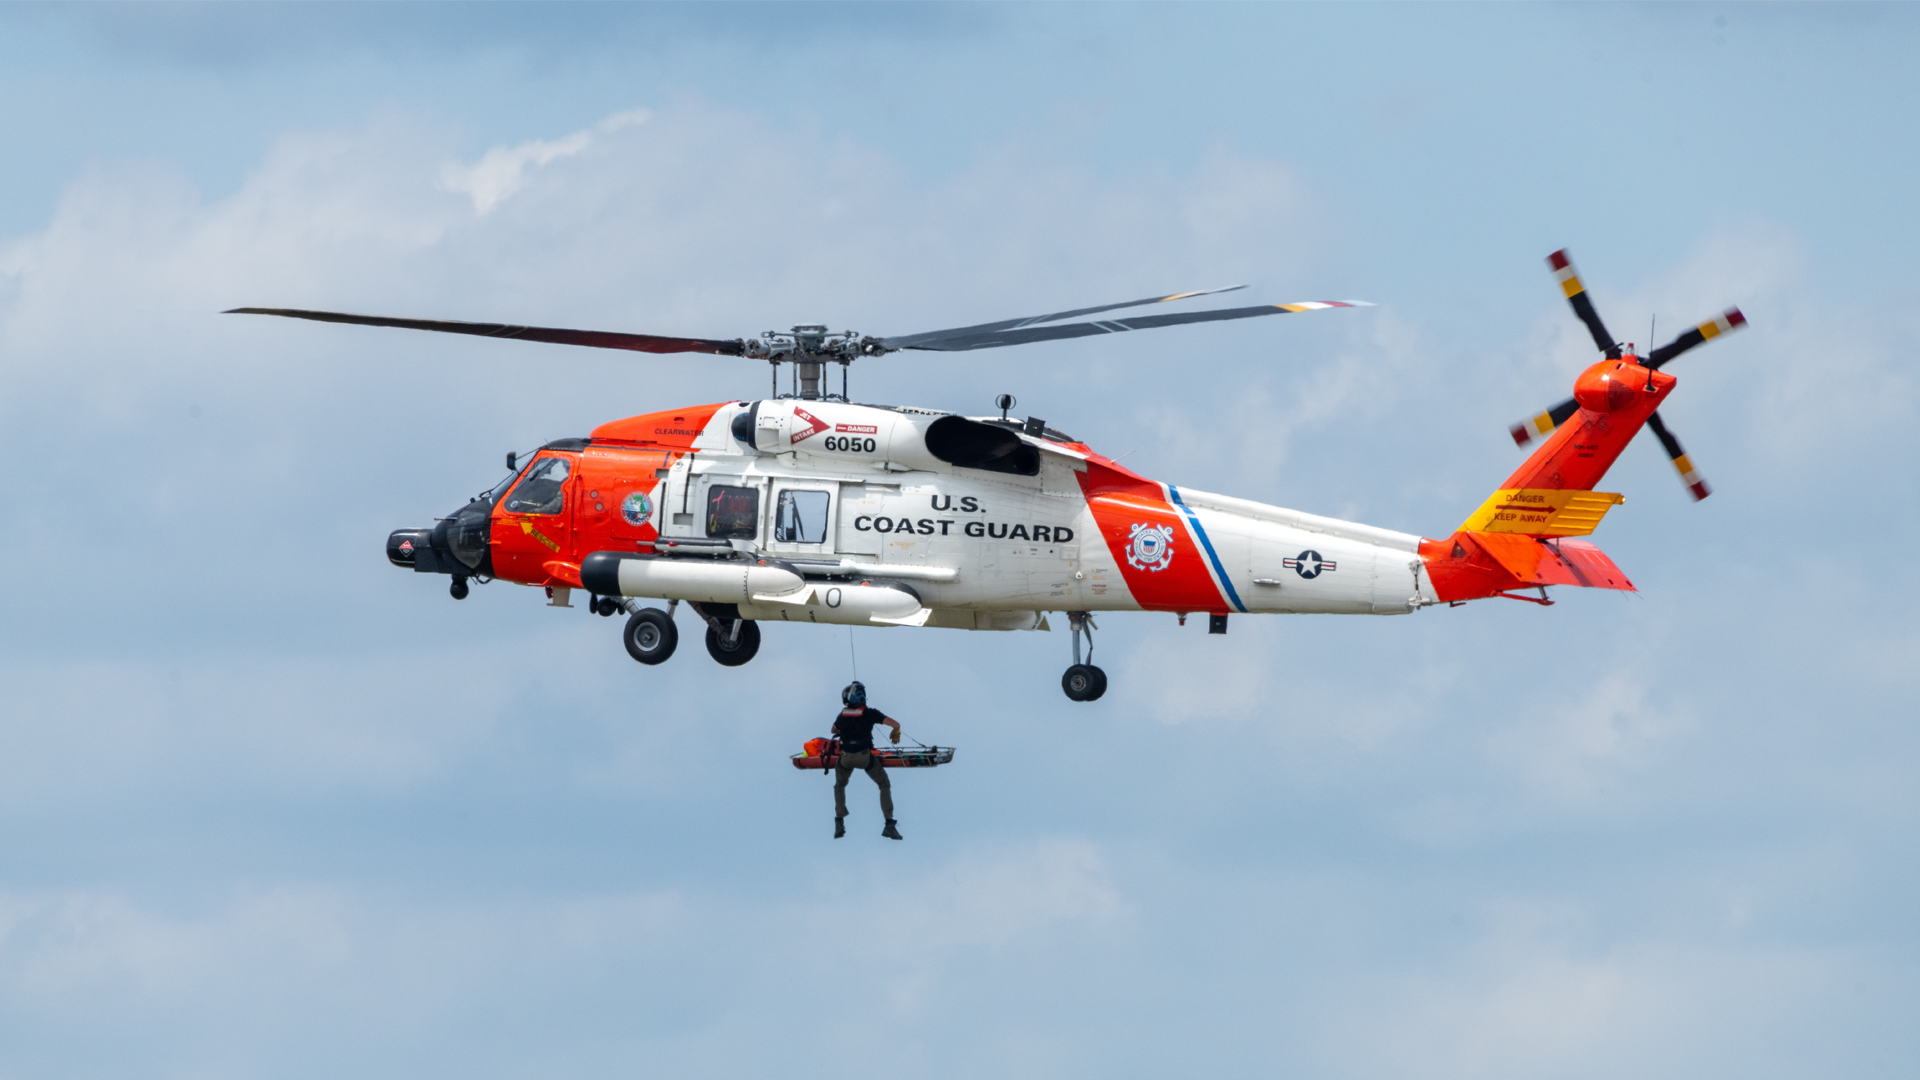 Image of a man being lowered out of a helicopter in the air